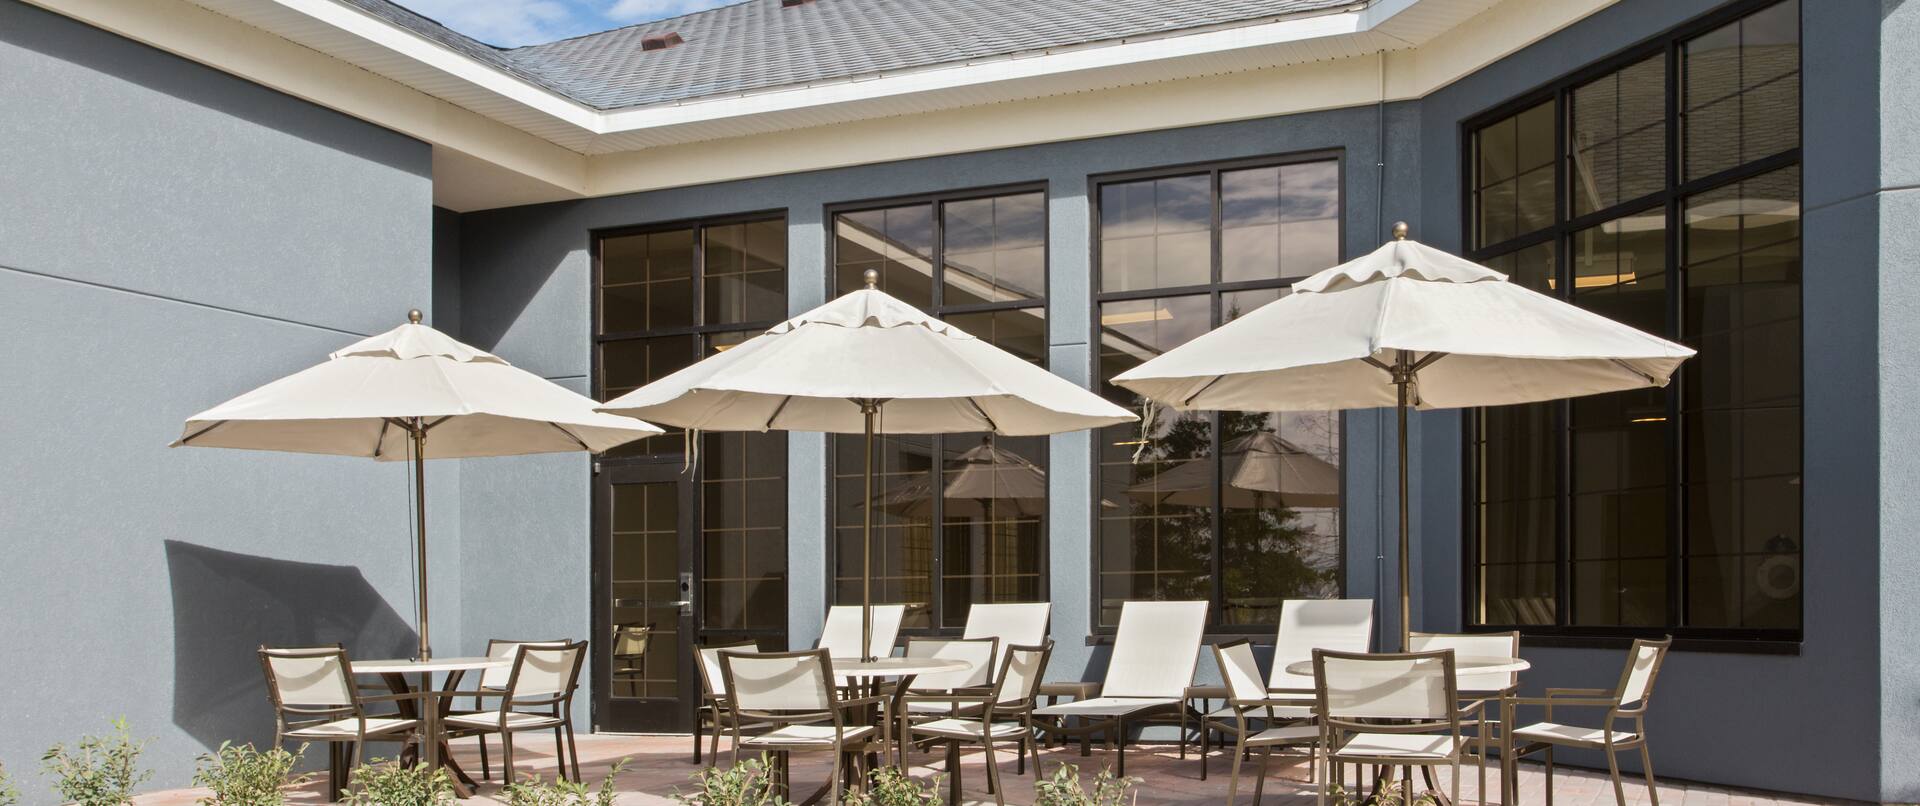 Tables With Umbrellas, Chairs, Landscaping, and Hotel Exterior